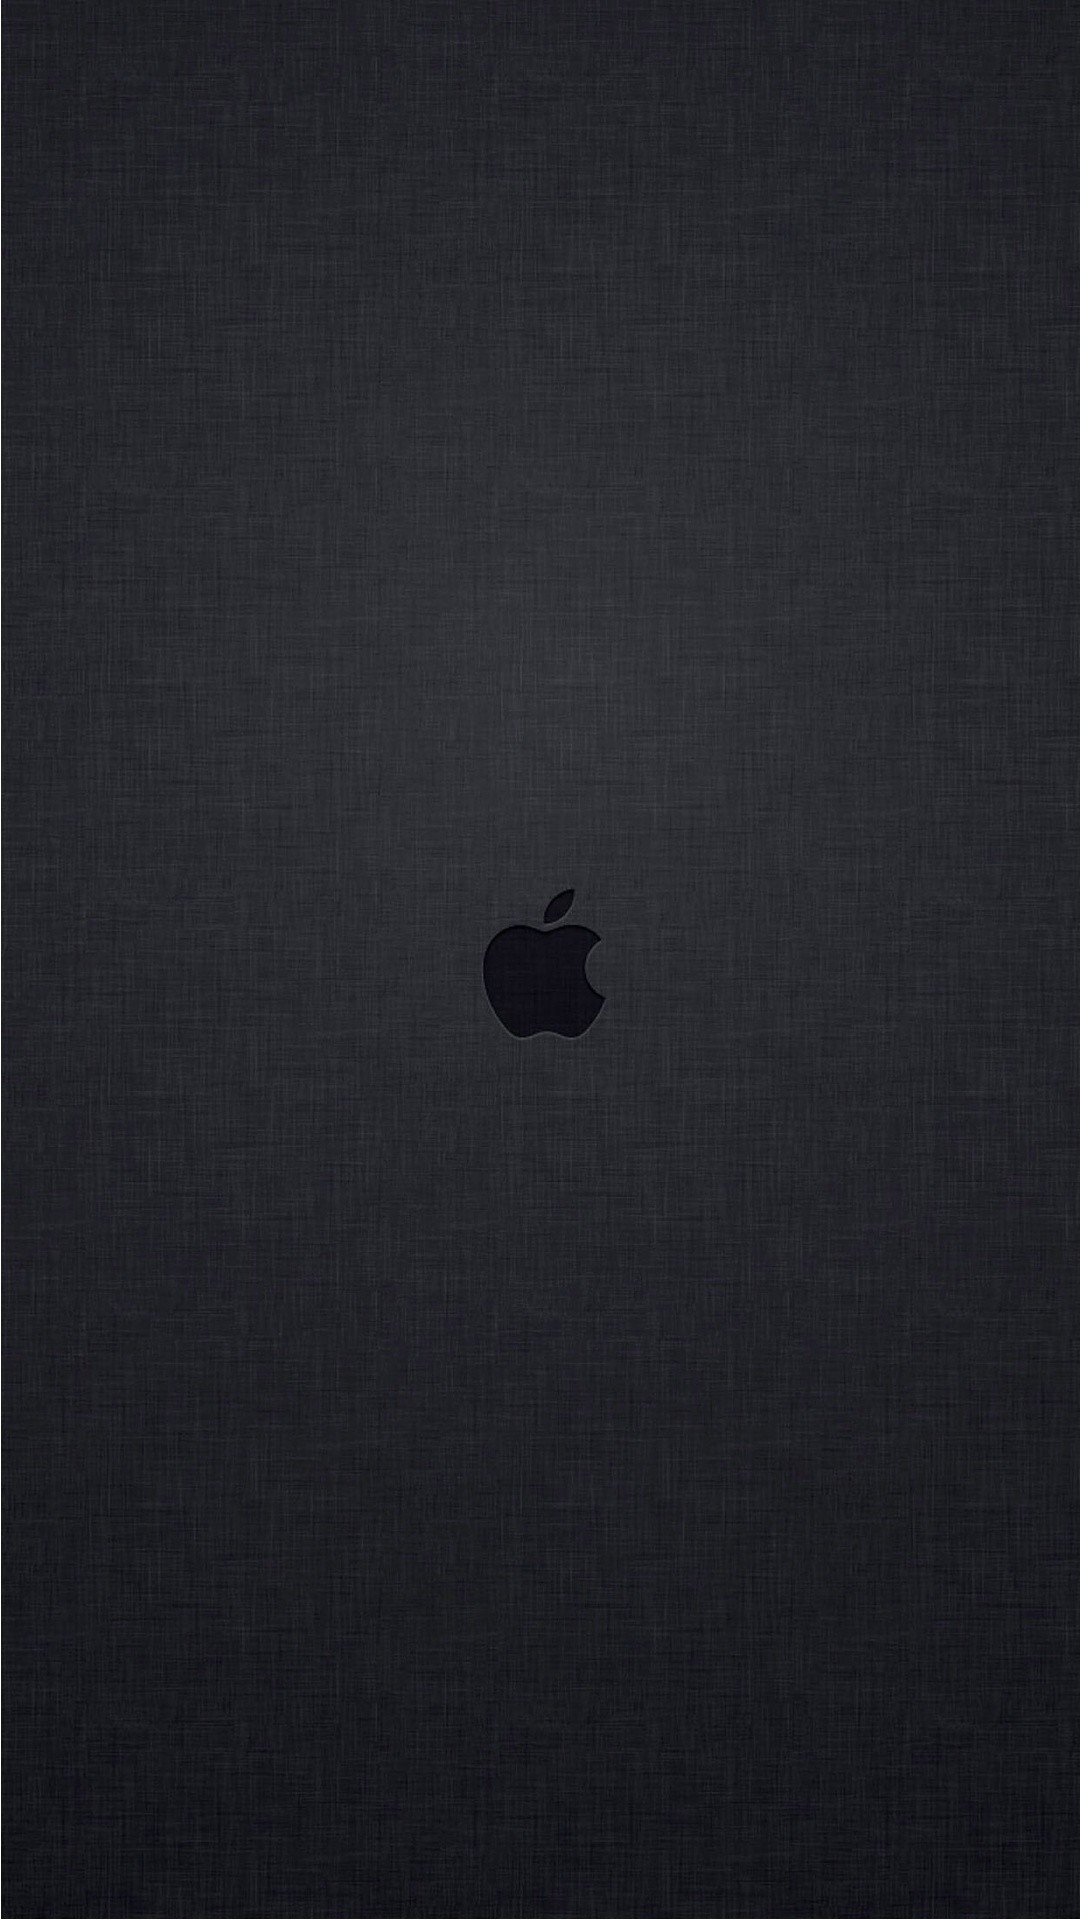 1080x1920 Best of Macintosh Apple Logo Wallpapers. Tap image for more! - @mobile9 |